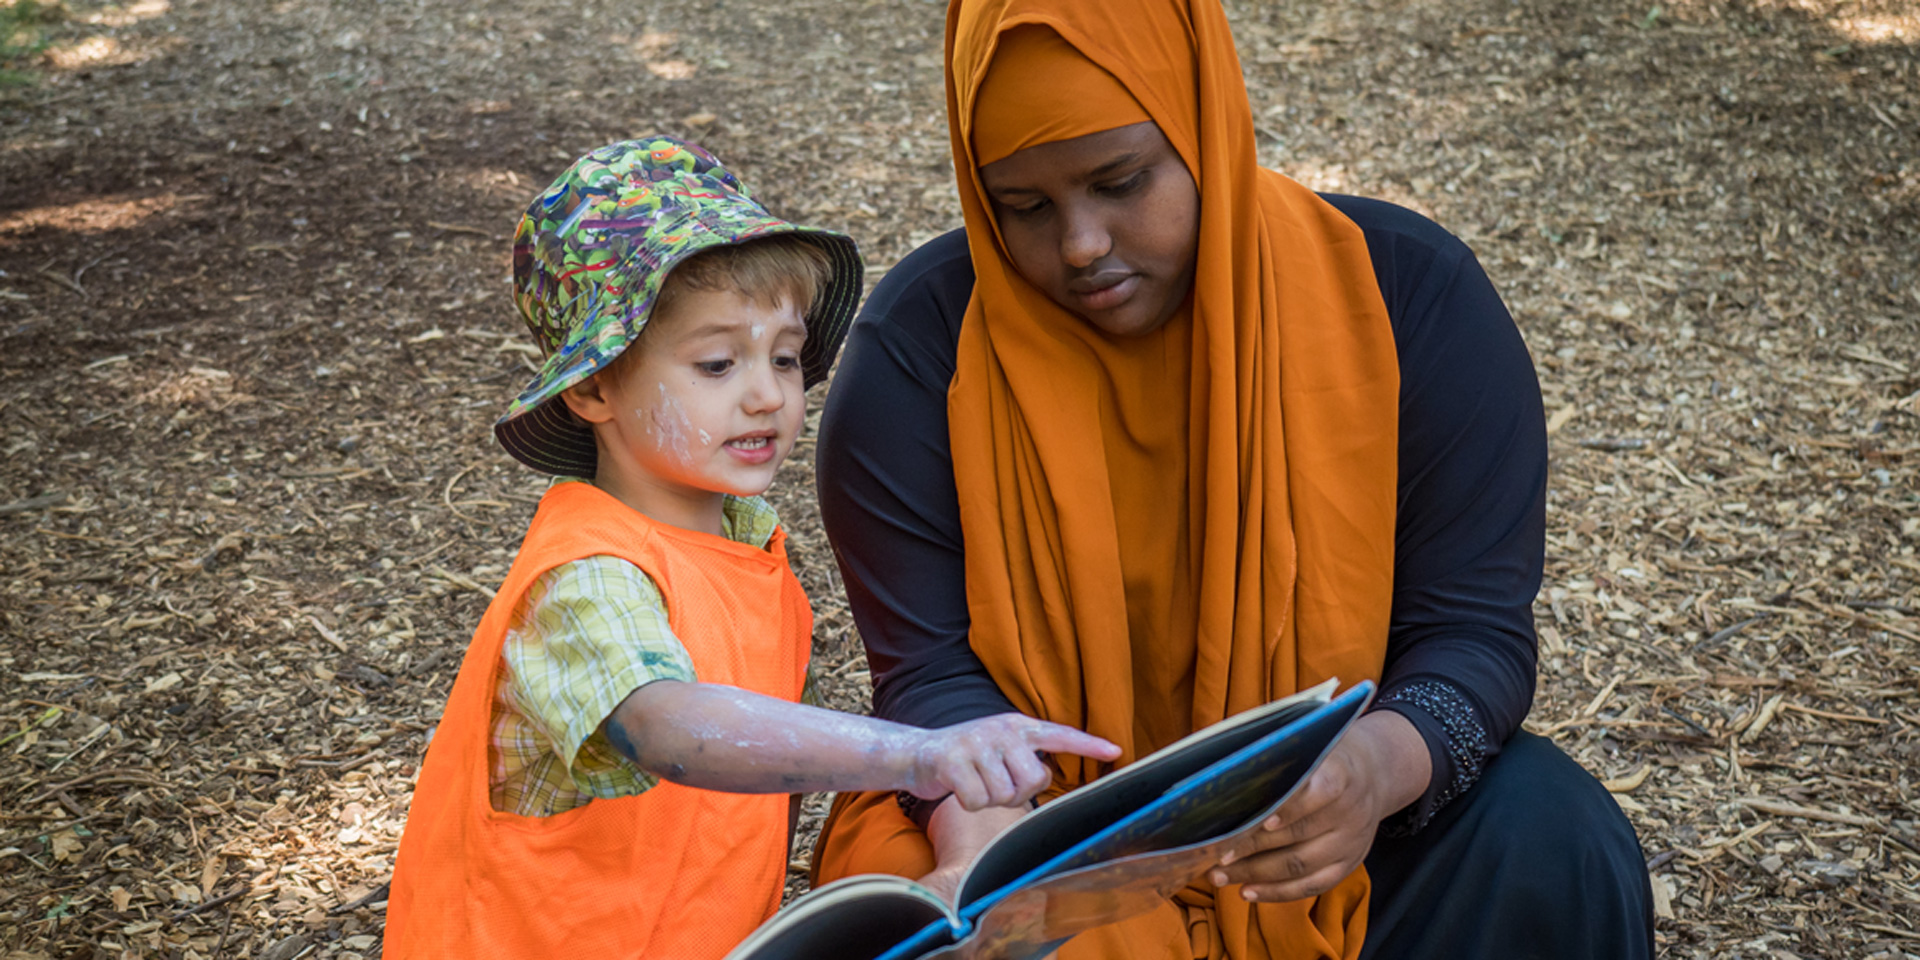 A woman reads a book outdoors with a small boy who has paint and dirt on his face.